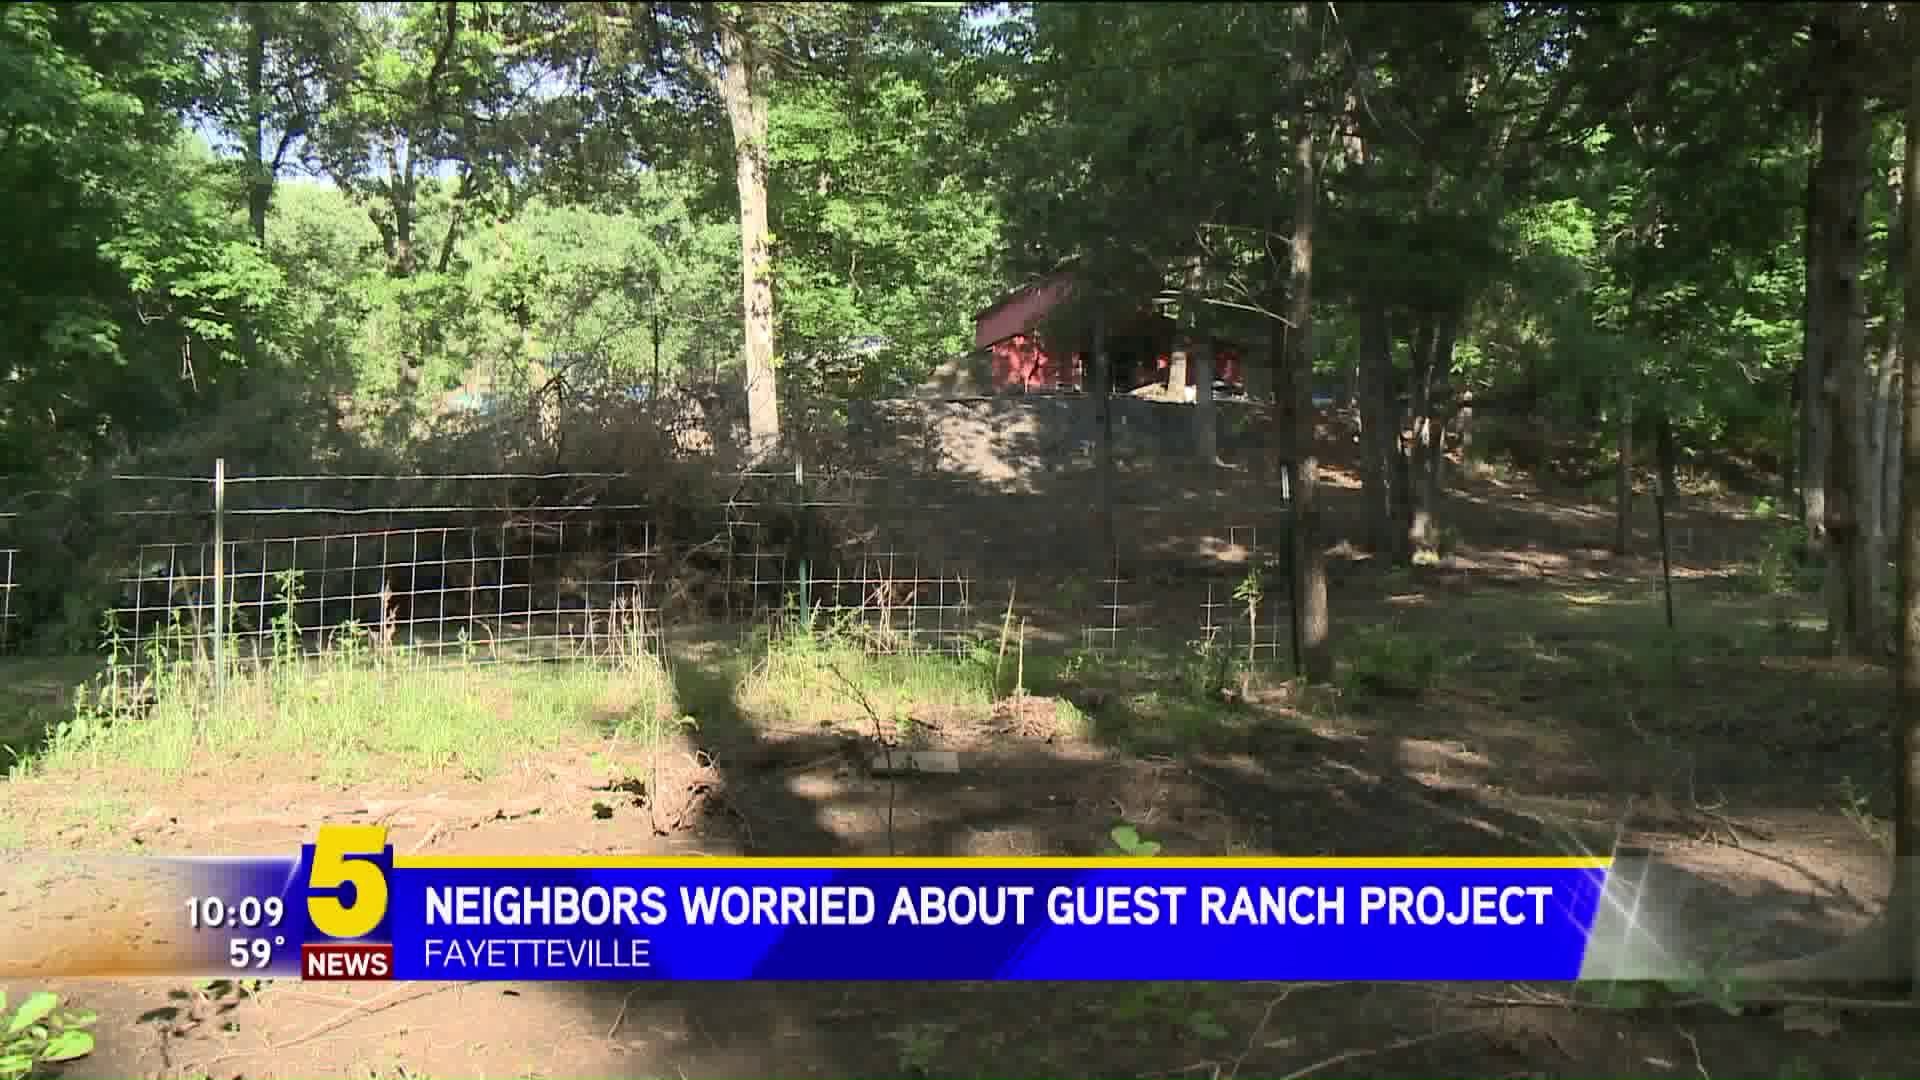 Neighbors Worried About Guest Ranch Project